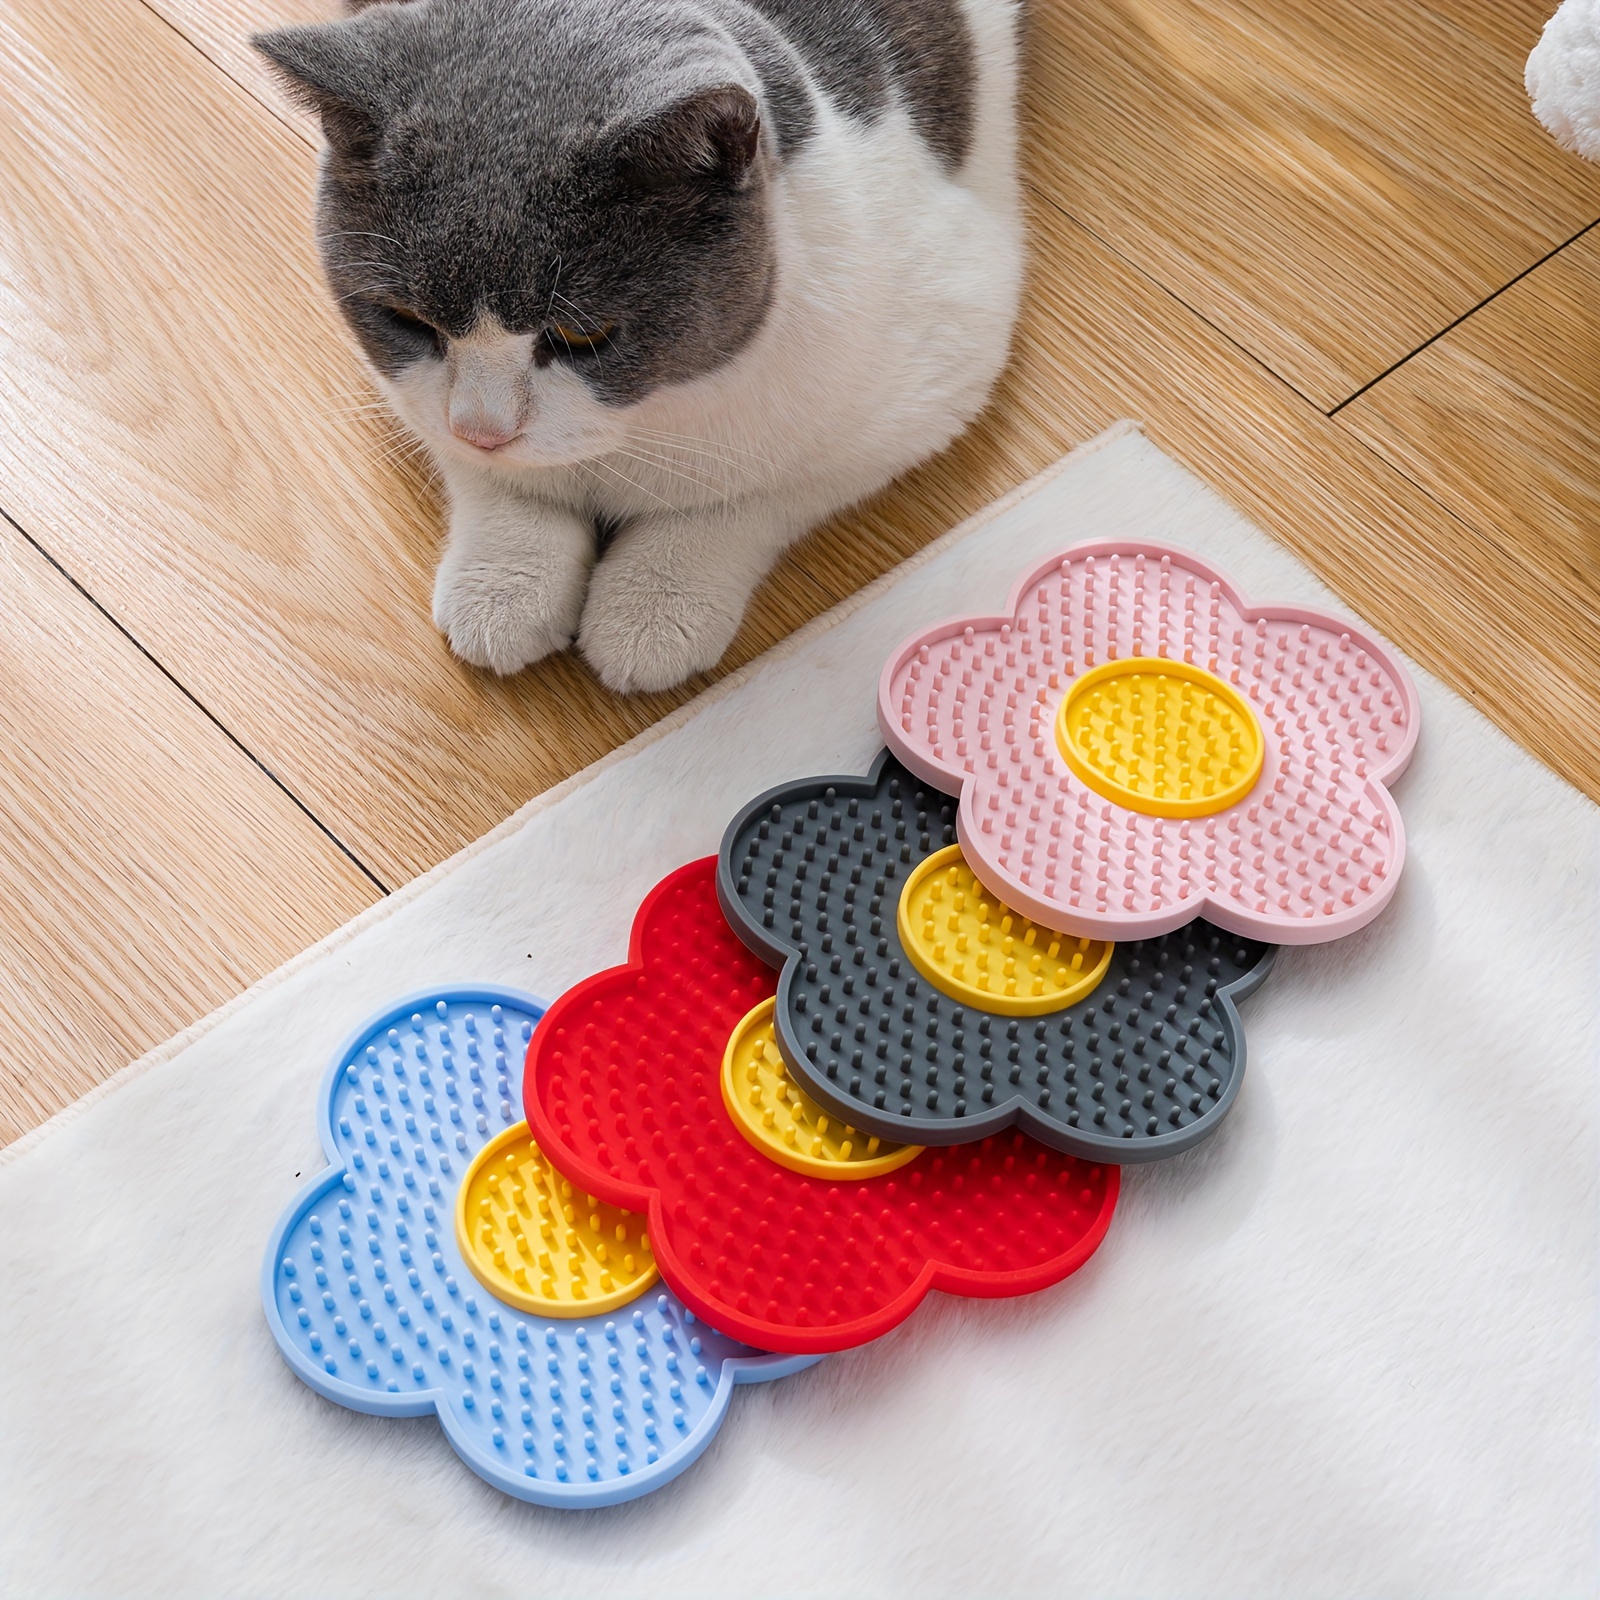 

Lovely Flower Silicone Lick Mat For Dogs & Cats - Slow Feeder With Non-slip Suction Cups, , Dental Health Enhancer, Ideal For Grooming & Bath Time